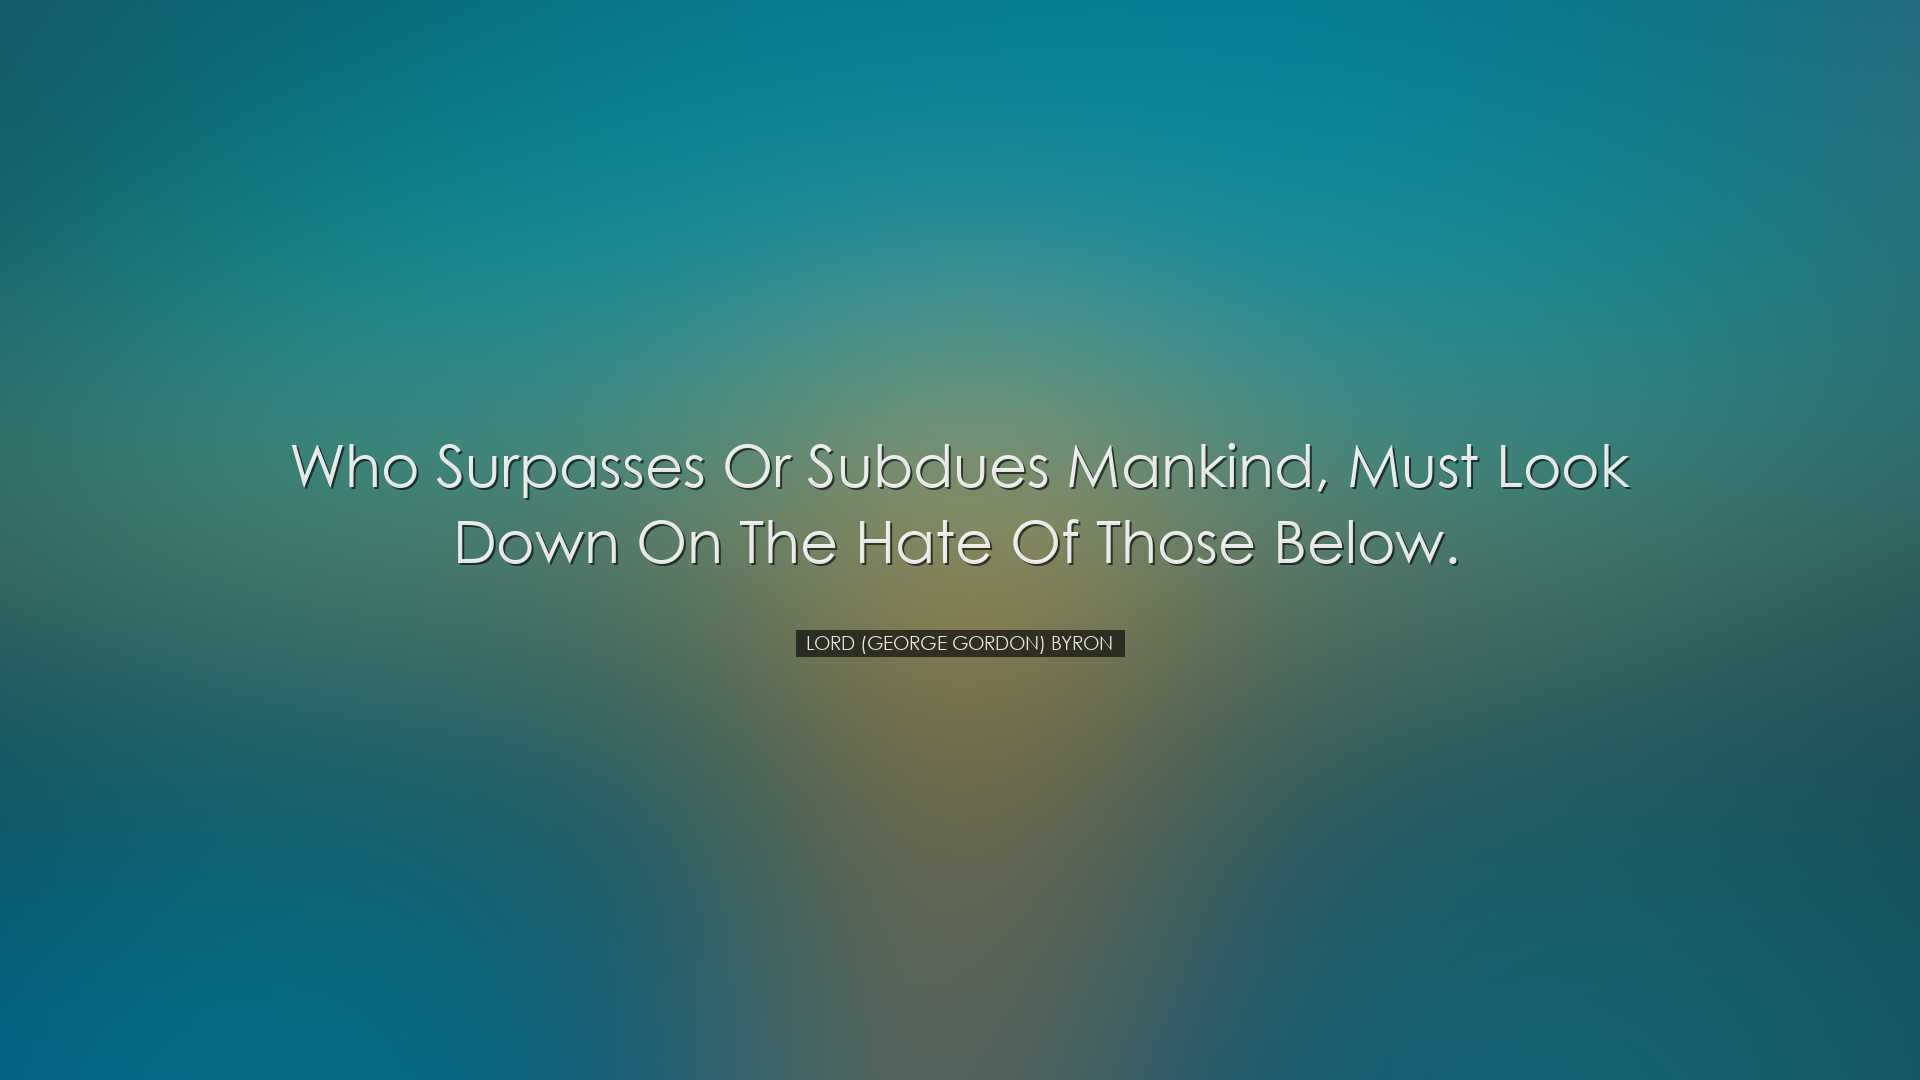 Who surpasses or subdues mankind, must look down on the hate of th